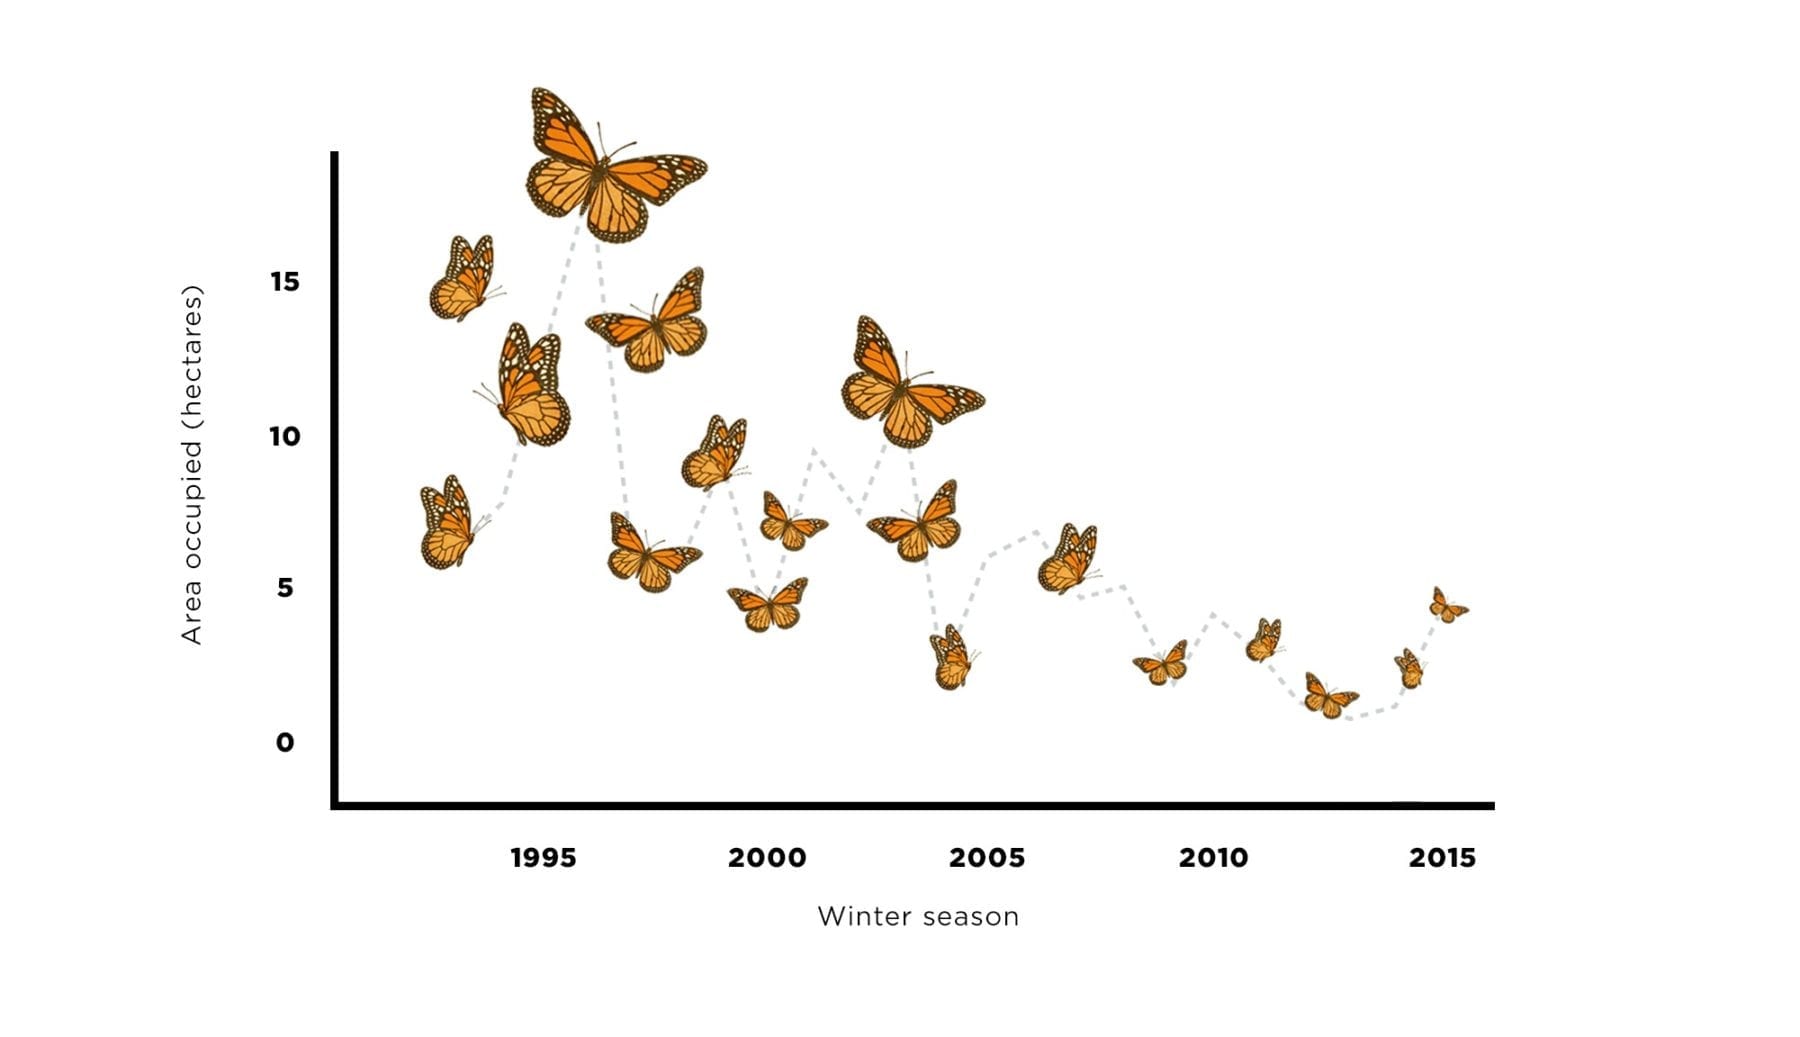 We need to think of migratory species at regional scales including monarch butterflies